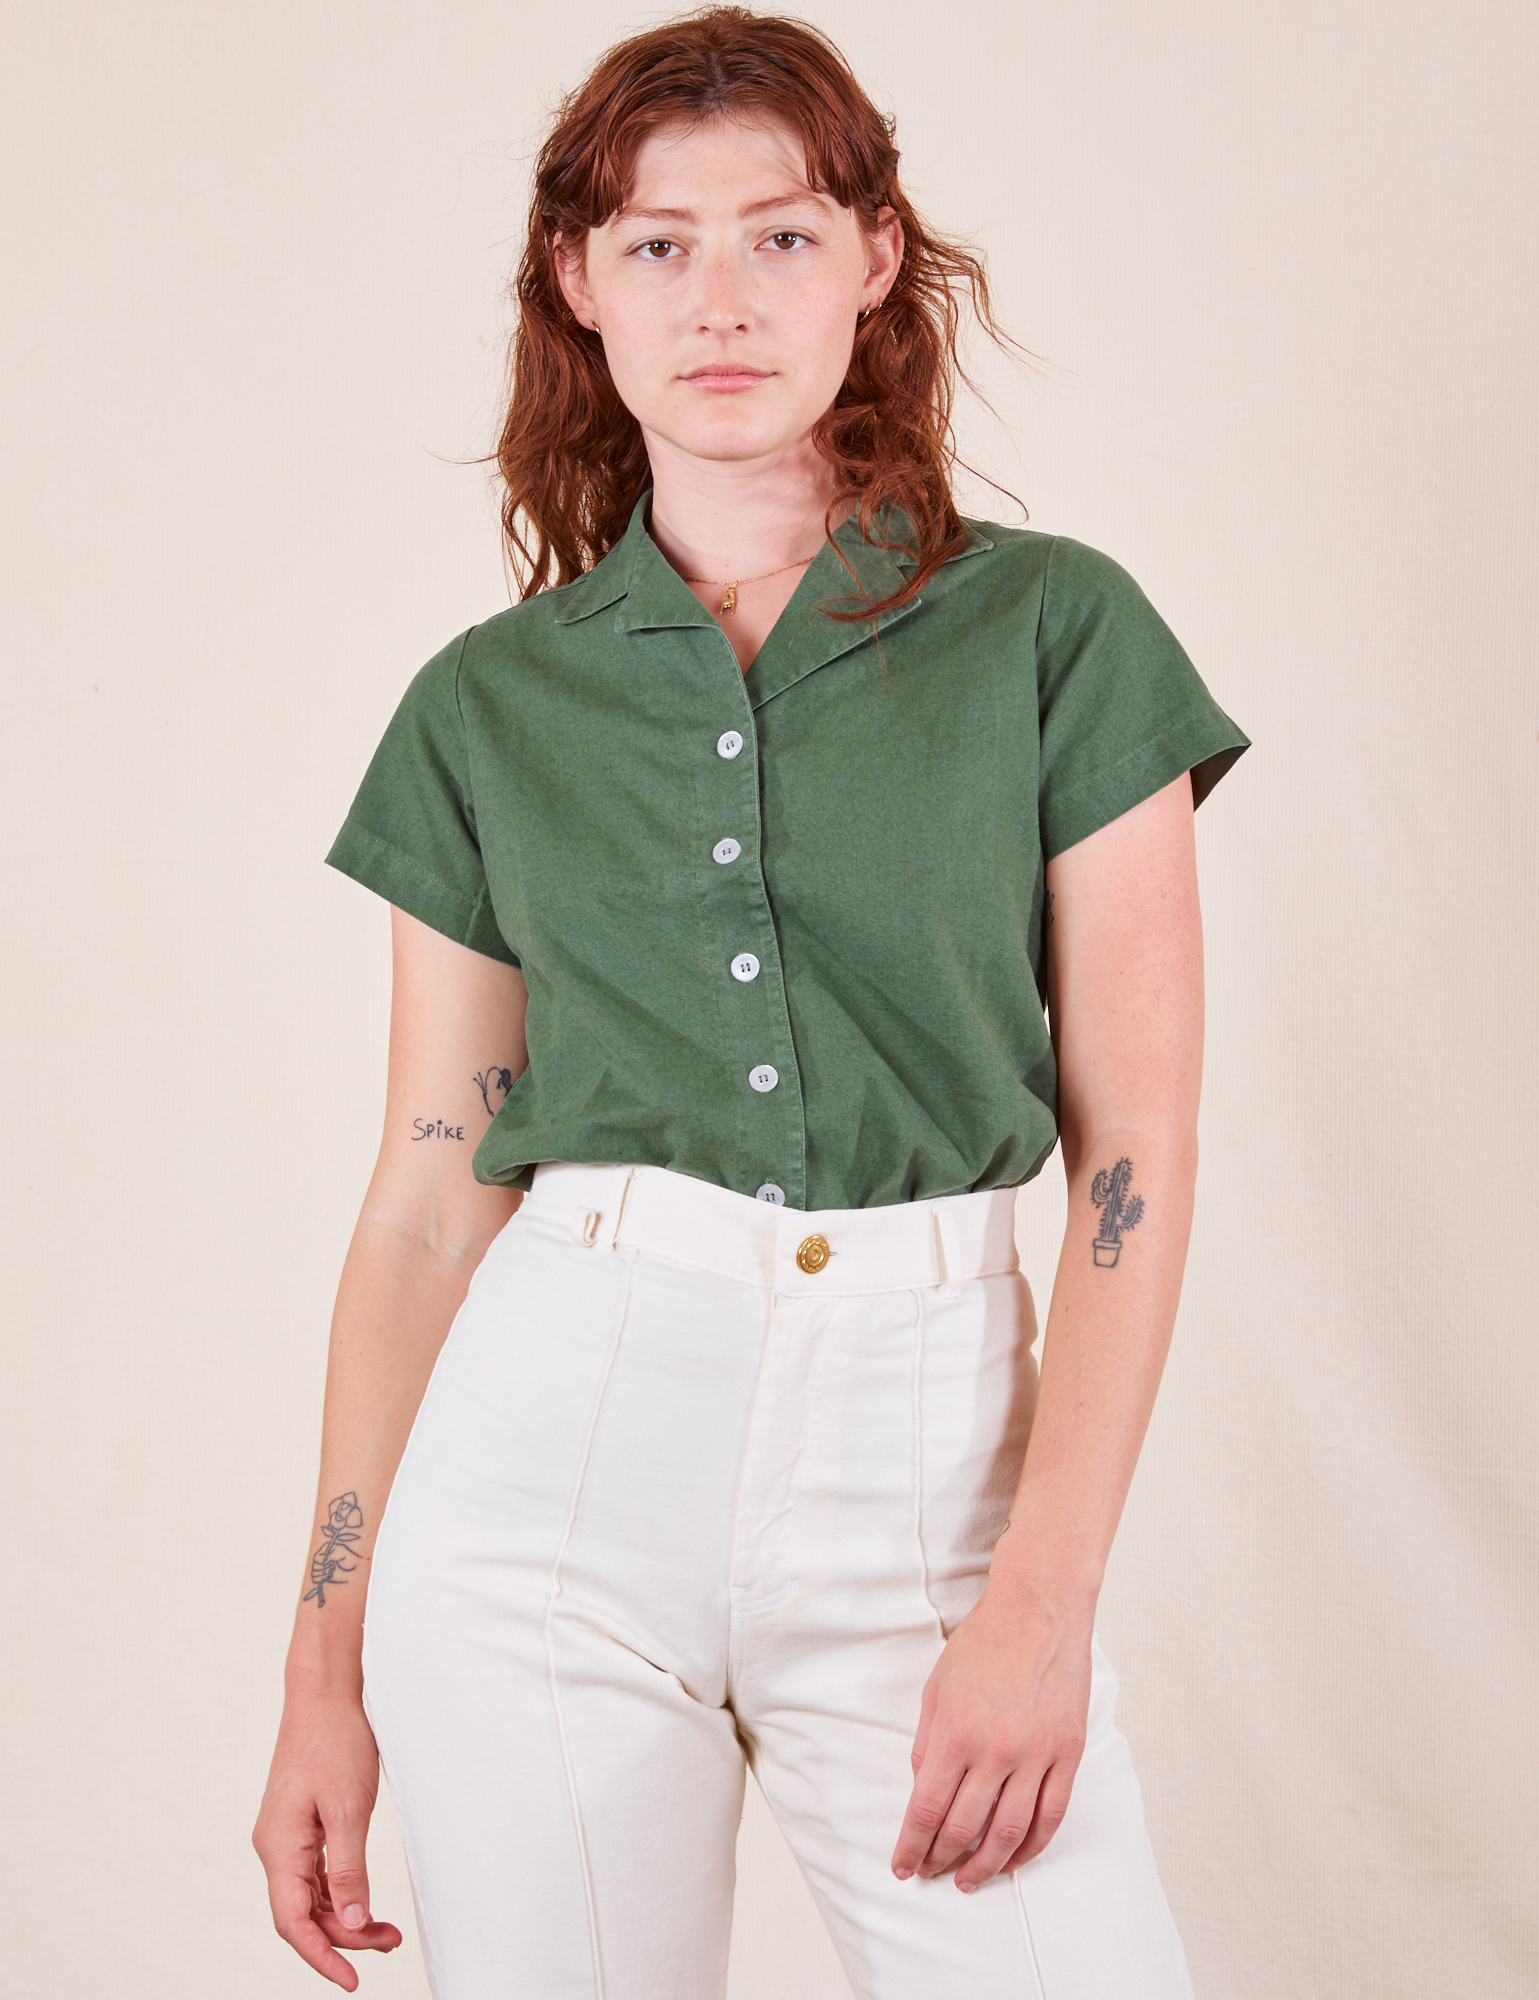 Alex is wearing P Pantry Button-Up in Dark Emerald Green tucked into vintage tee off-white Western Pants